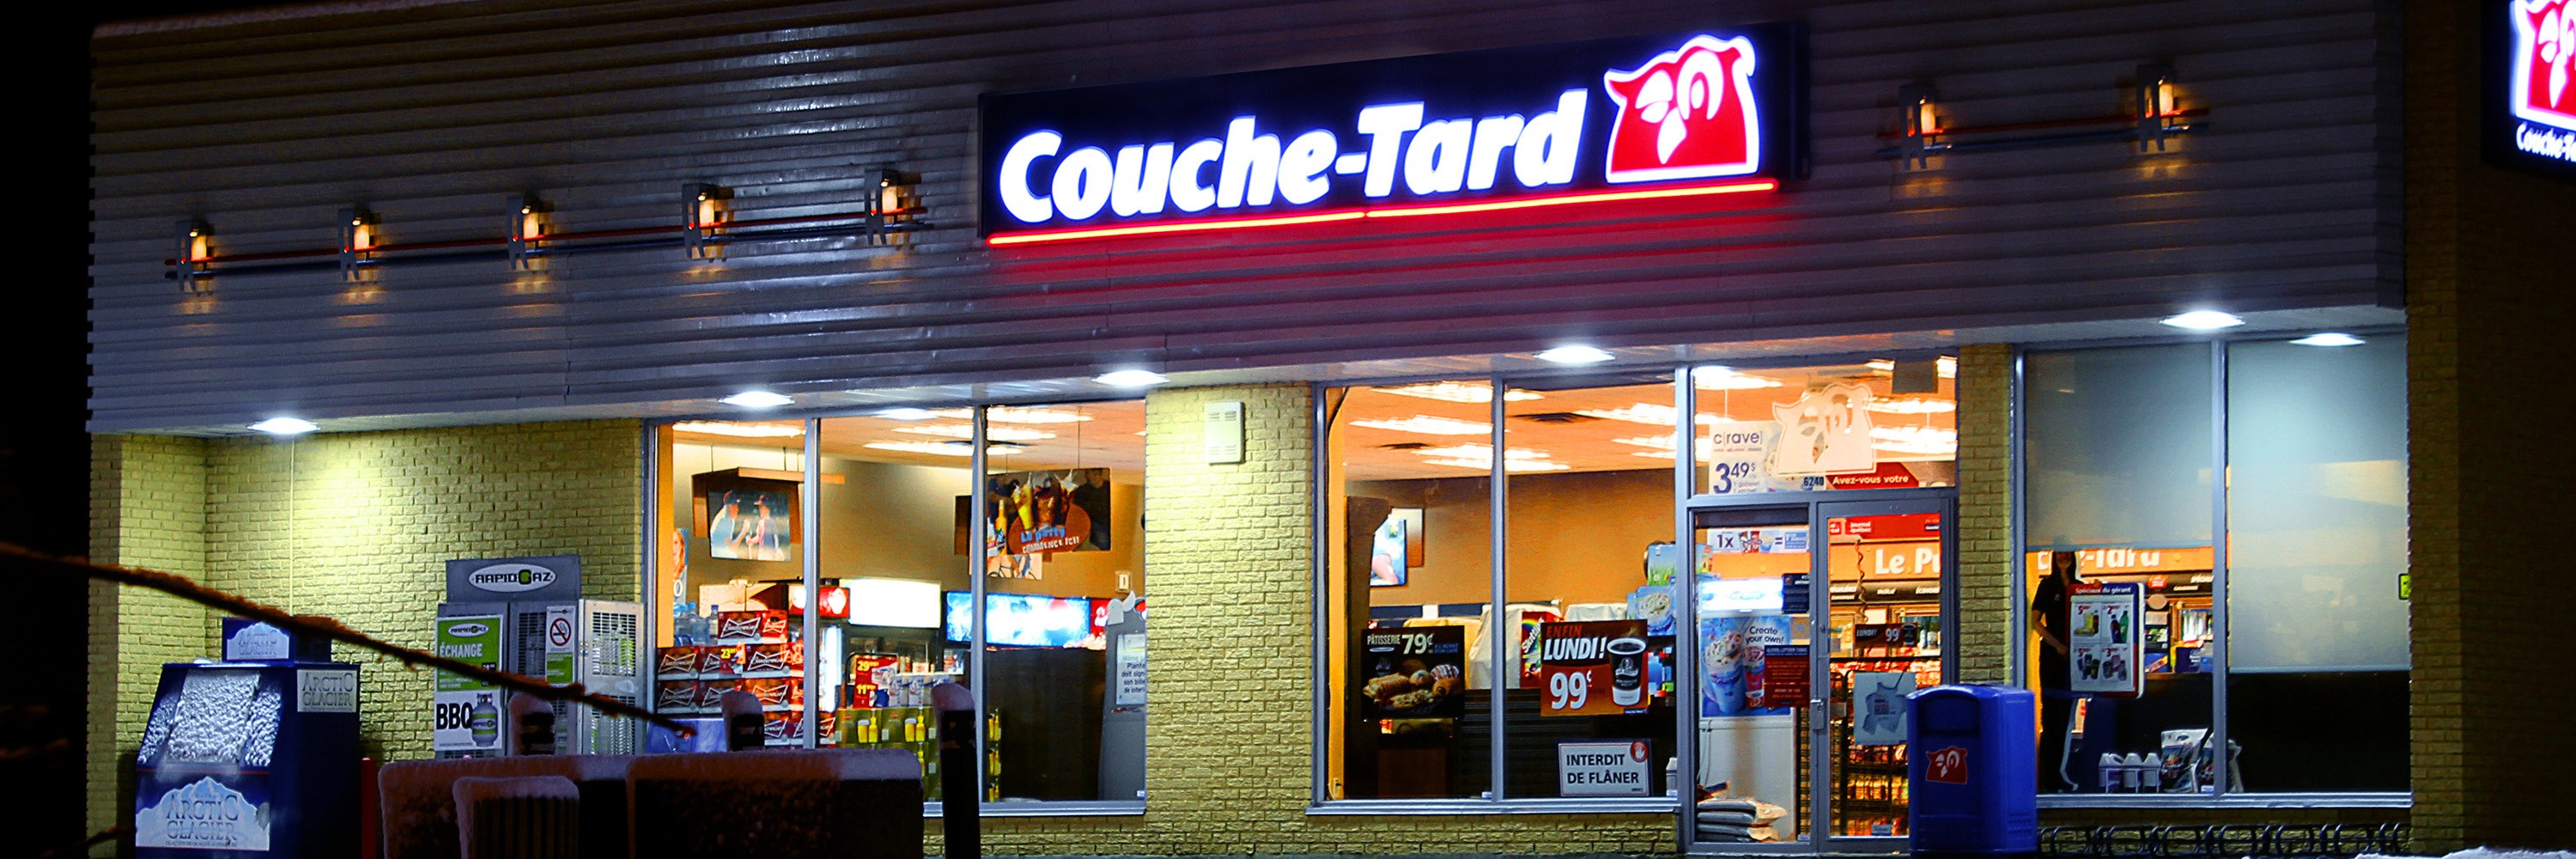 Alimentation Couche-Tard at night in Montreal, QC. Photo: Patrick Le Barbenchon/Wikimedia Commons/Creative Commons Attribution-Share Alike 3.0 Unported